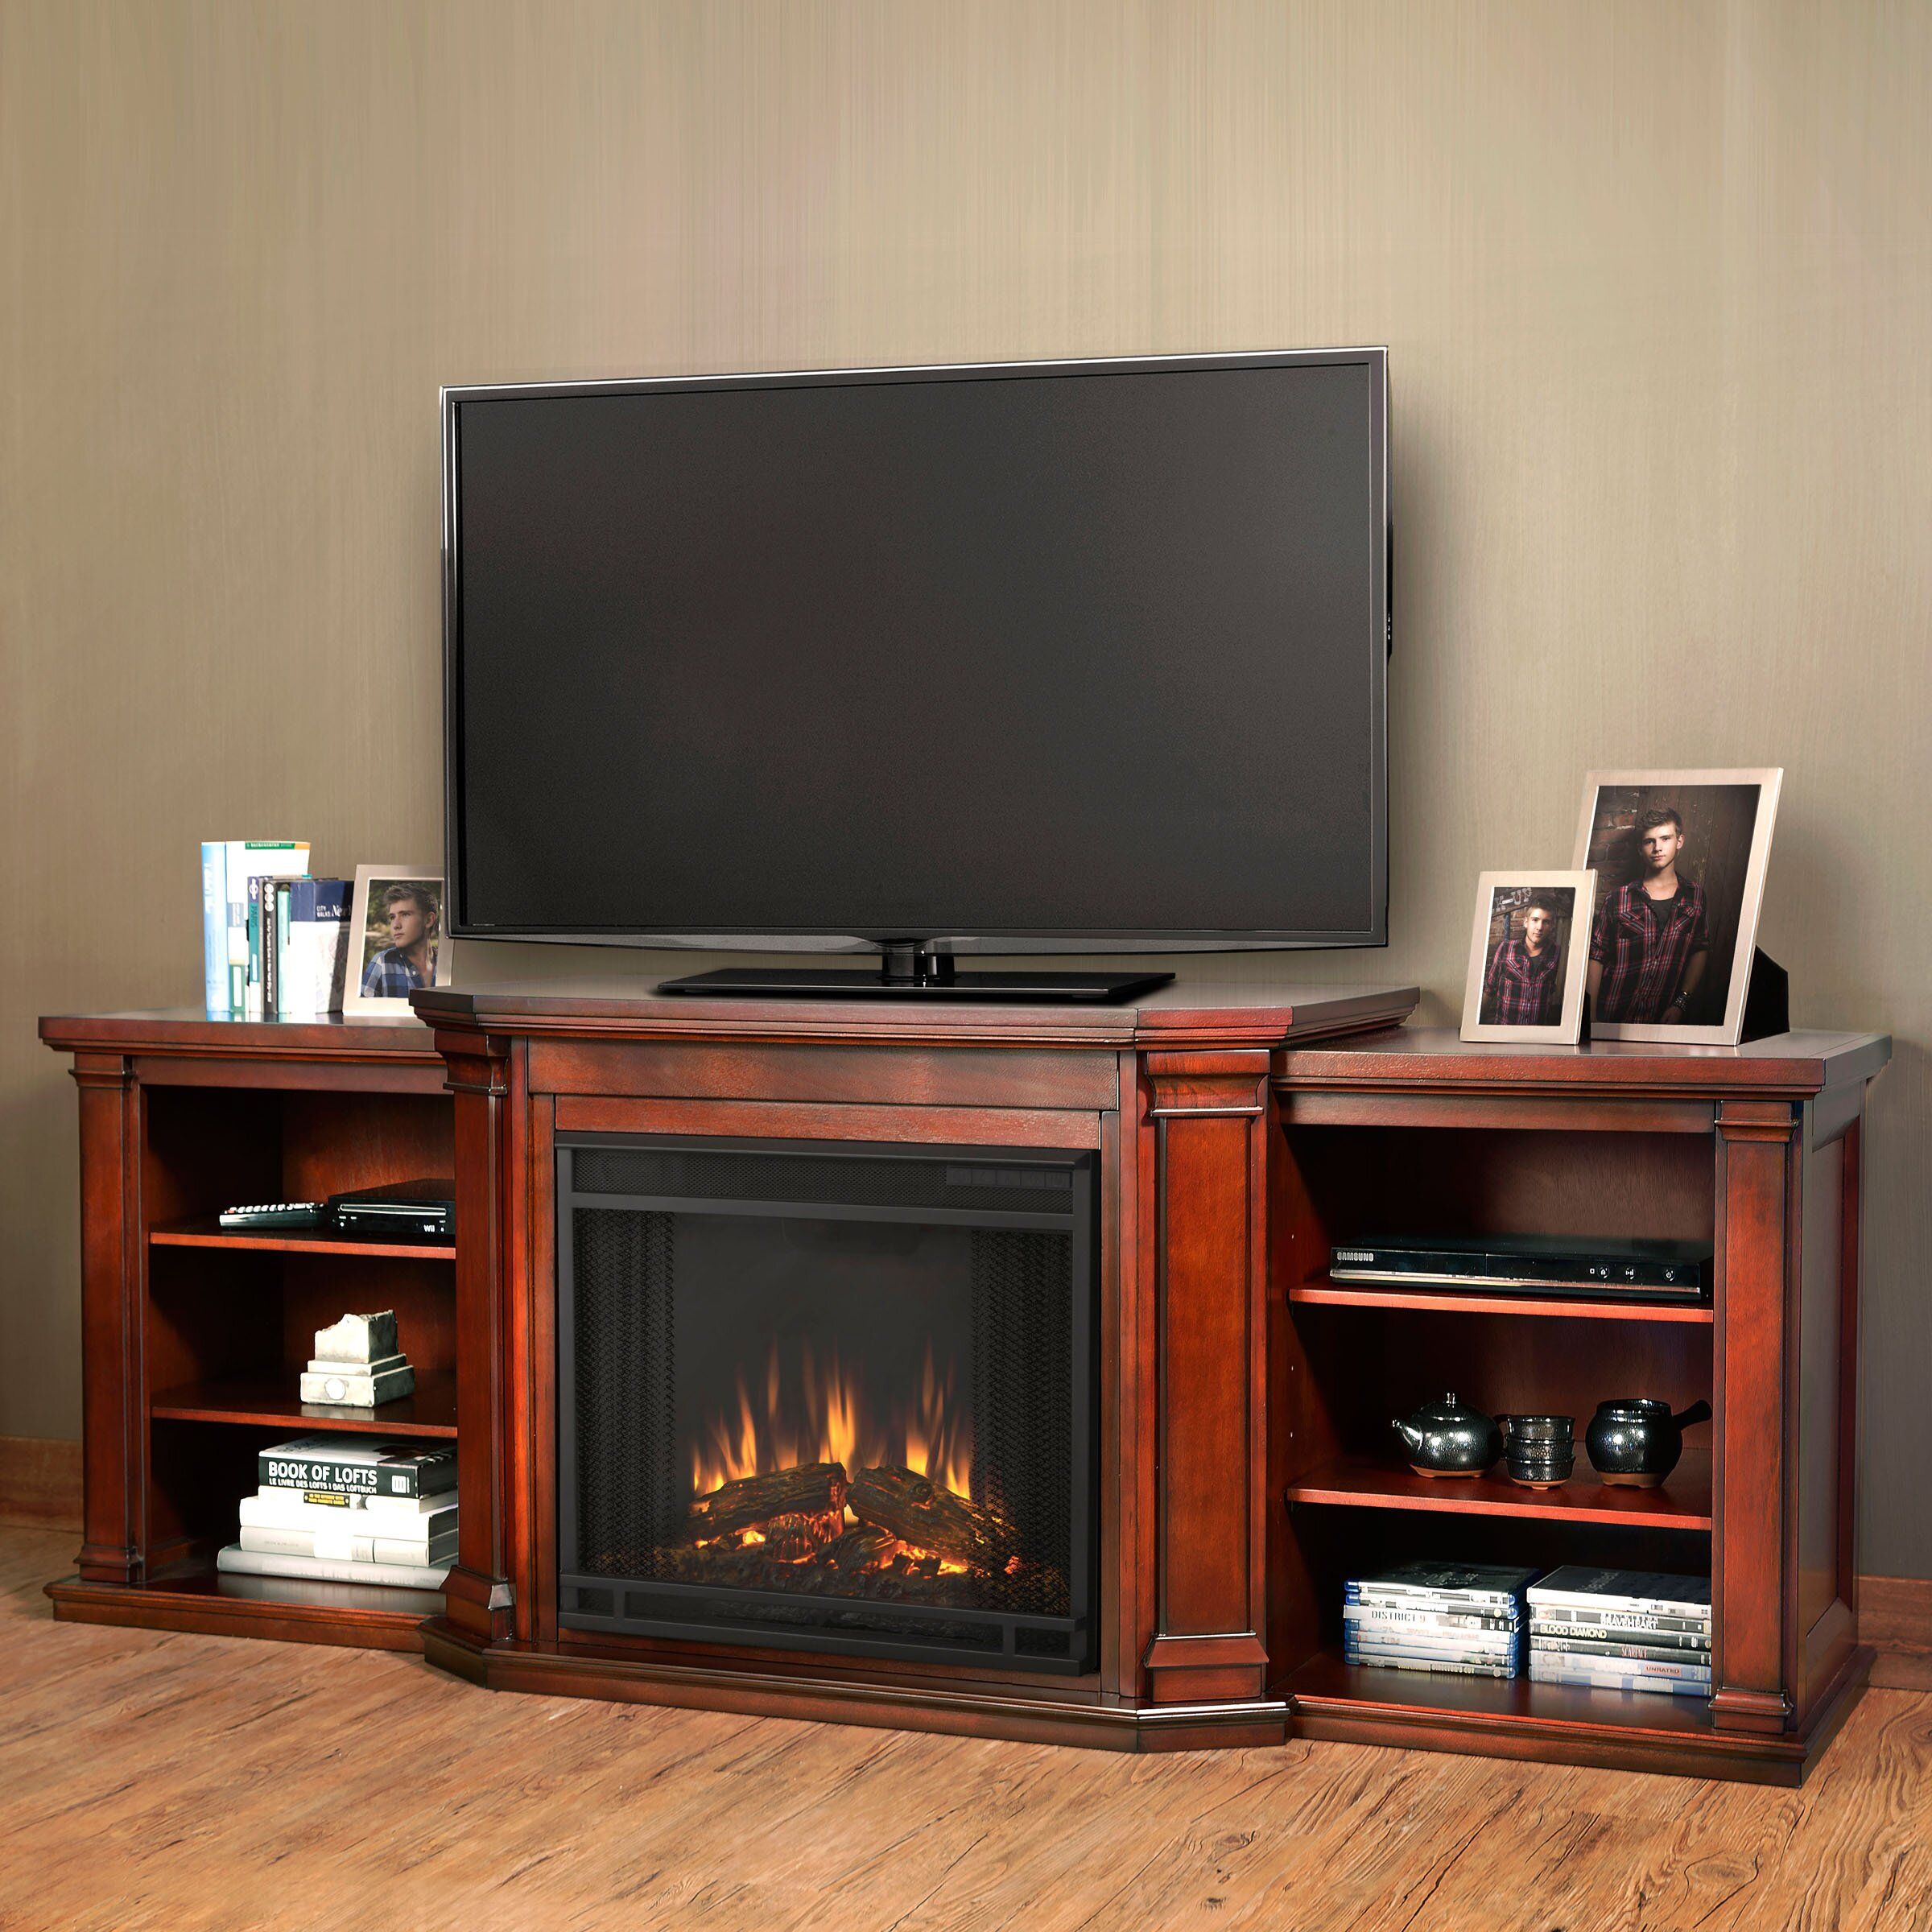 Real Flame Valmont Tv Stand With Electric Fireplace & Reviews | Wayfair In Electric Fireplace Tv Stands (View 14 of 20)